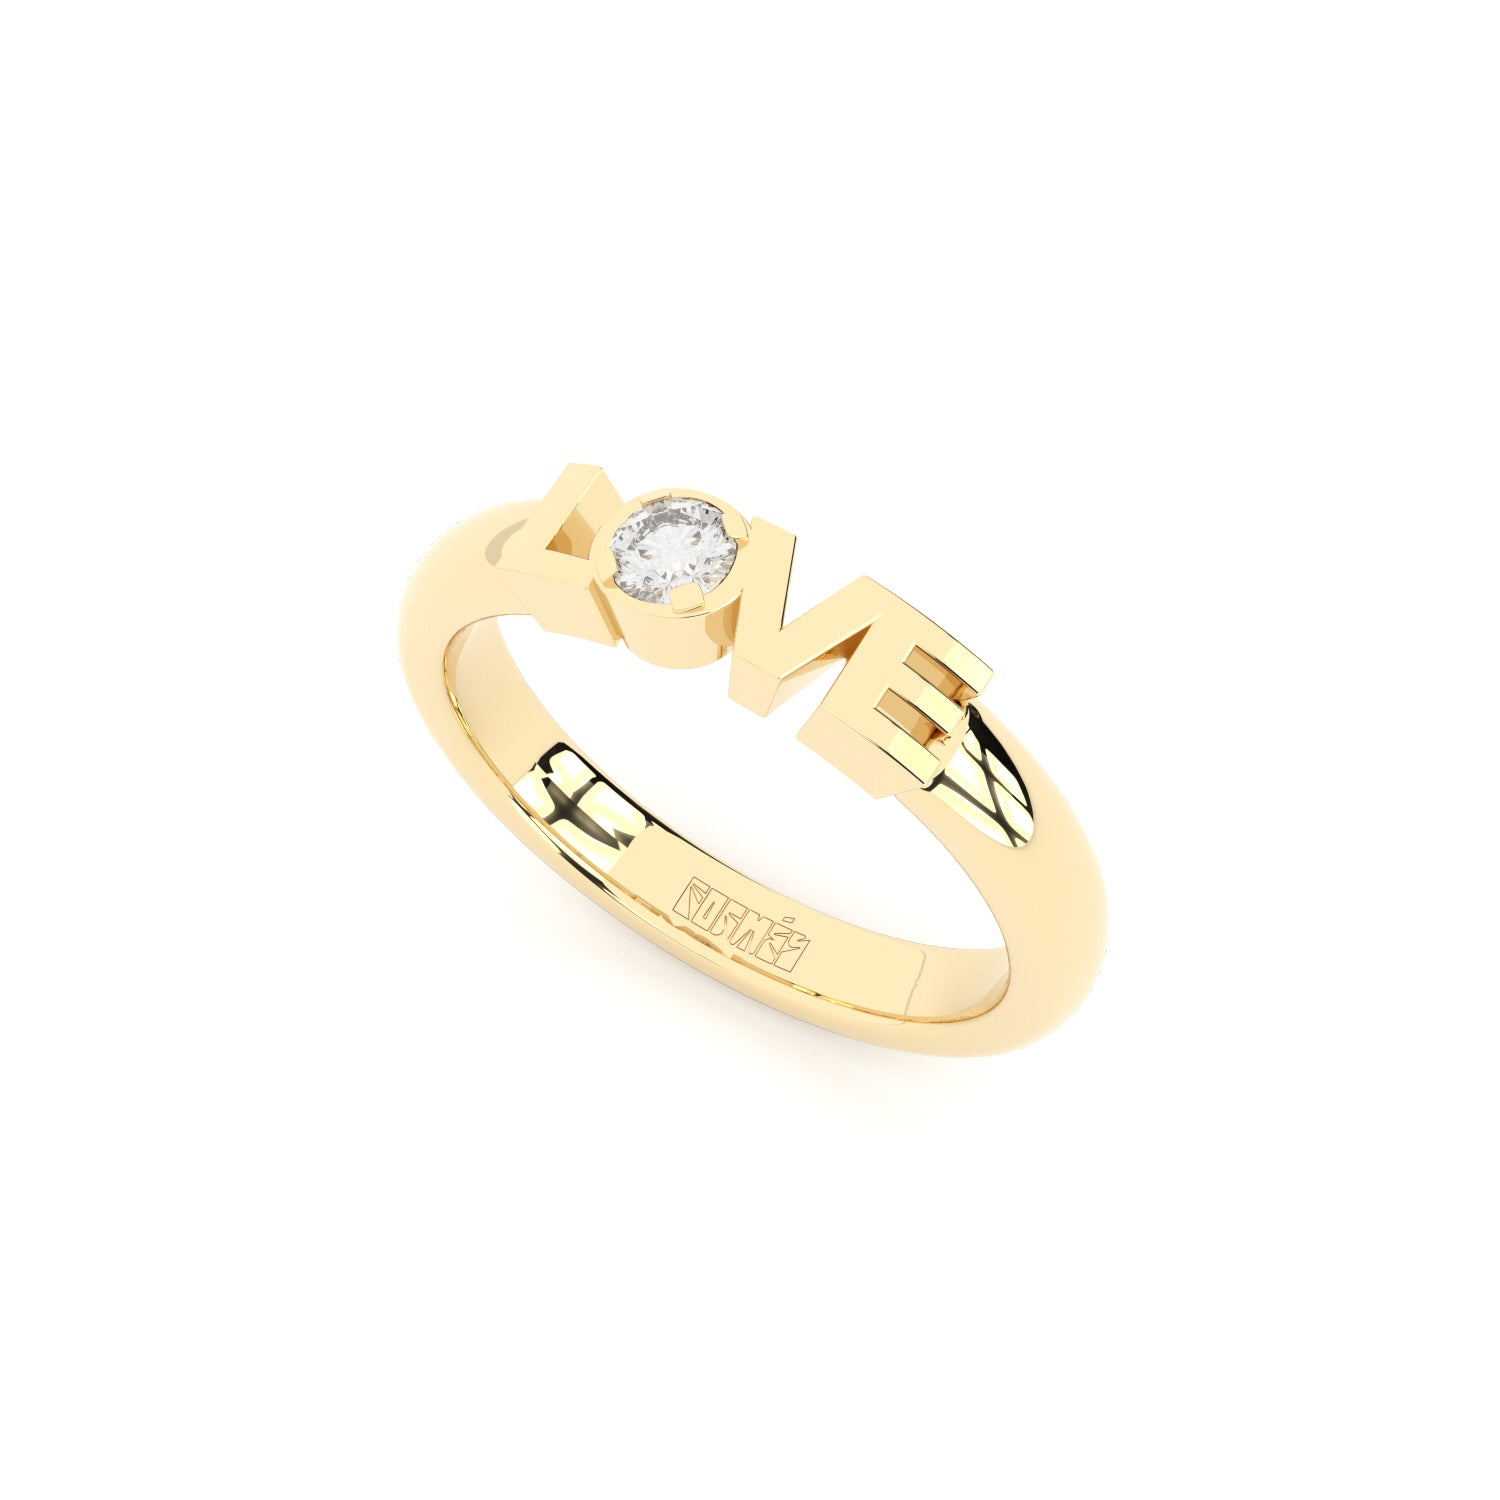 Solid Rose Gold Love Ring for Women - Affordable Price